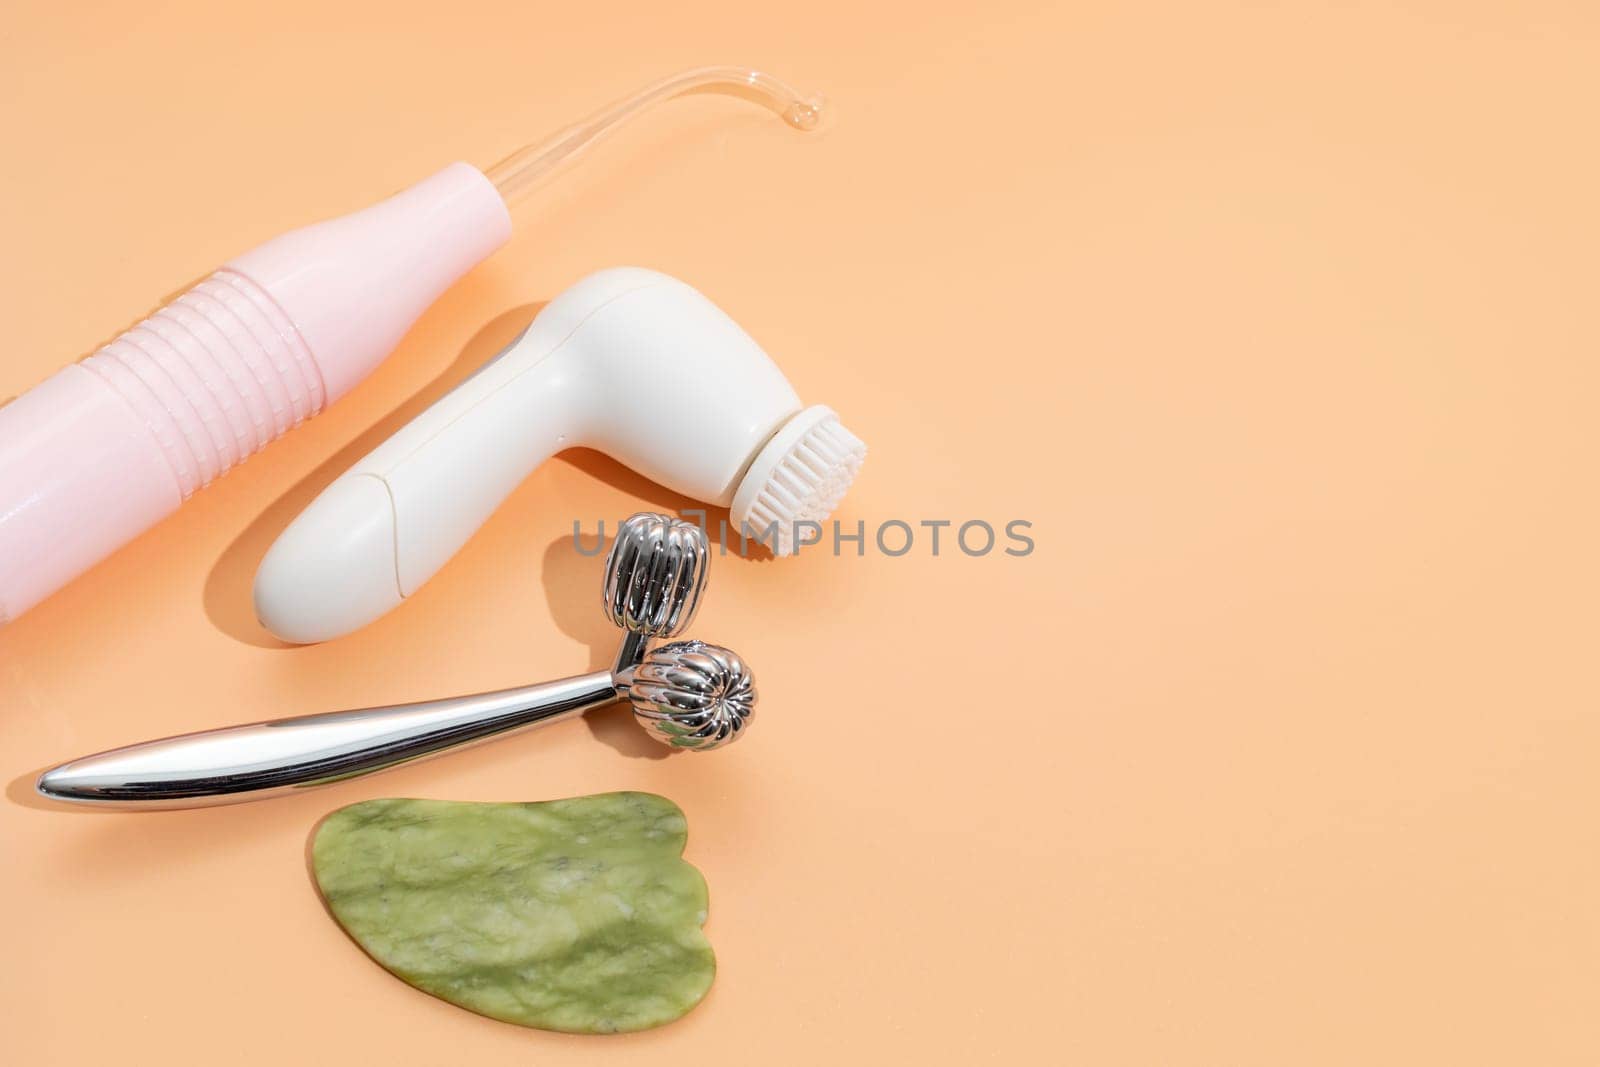 Flatly Mockup Skin Care Products. Facial Tool Gua Sha, Darsonval Skin Beauty Device, Sculpt Facial Roller, Anti-Aging, Facial Cleansing Brush on Beige Background. Copy Space For Text. Horizontal Plane by netatsi